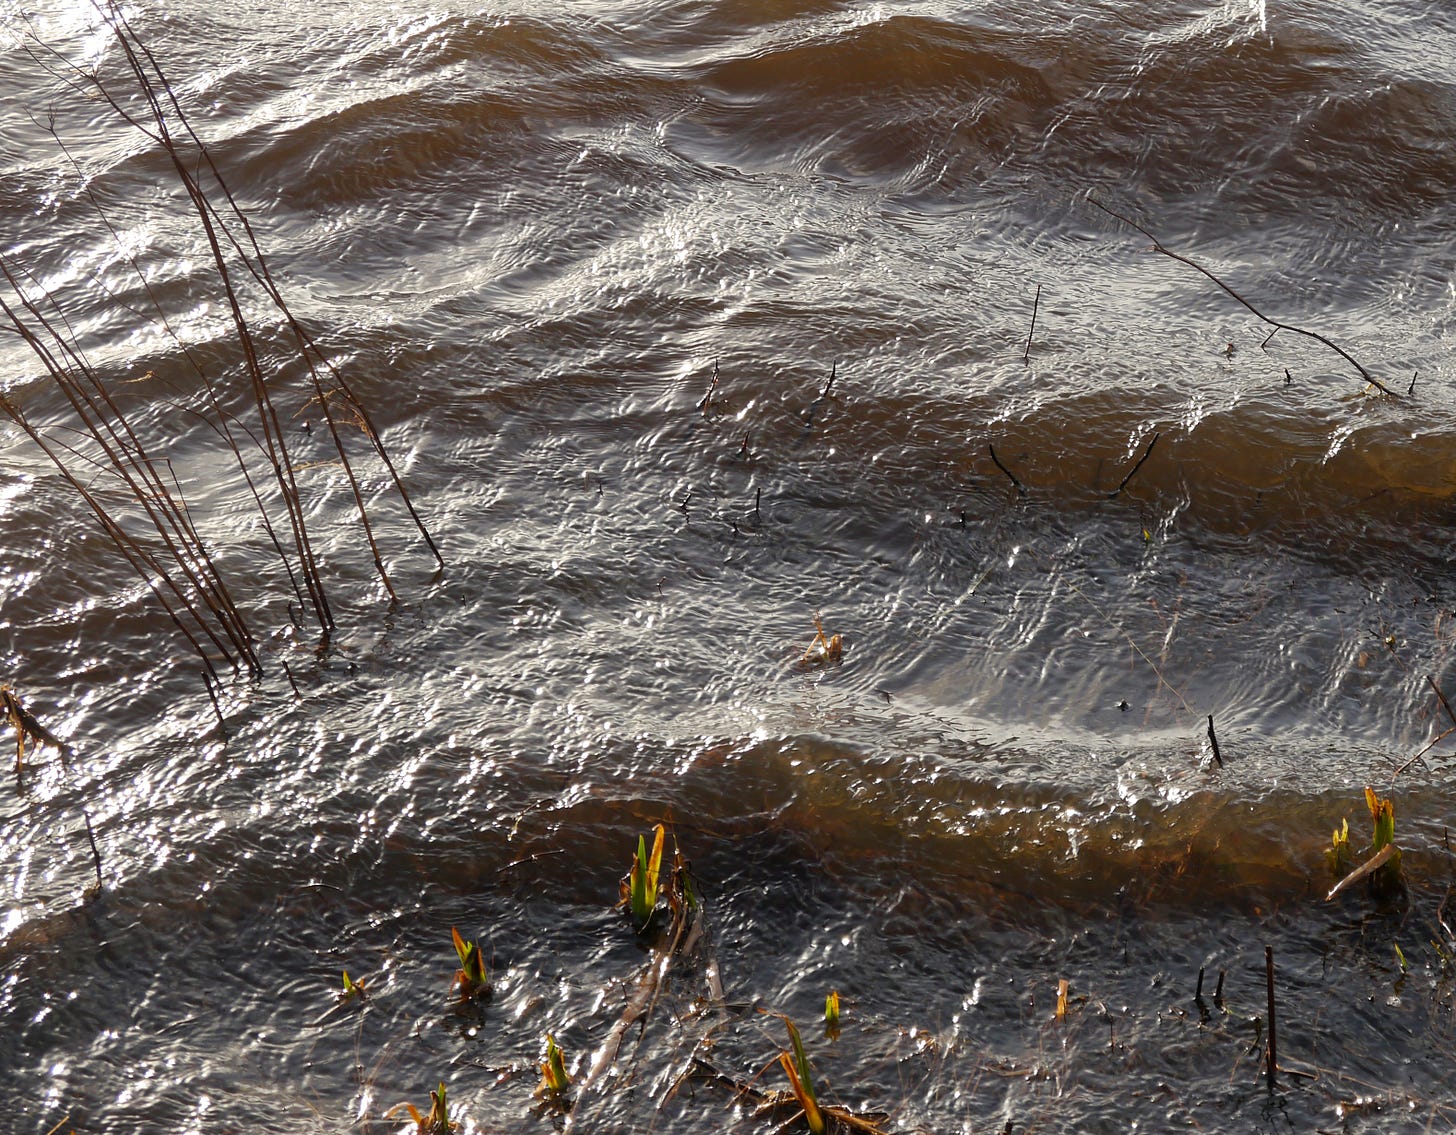 Ripples in shallow water with reeds